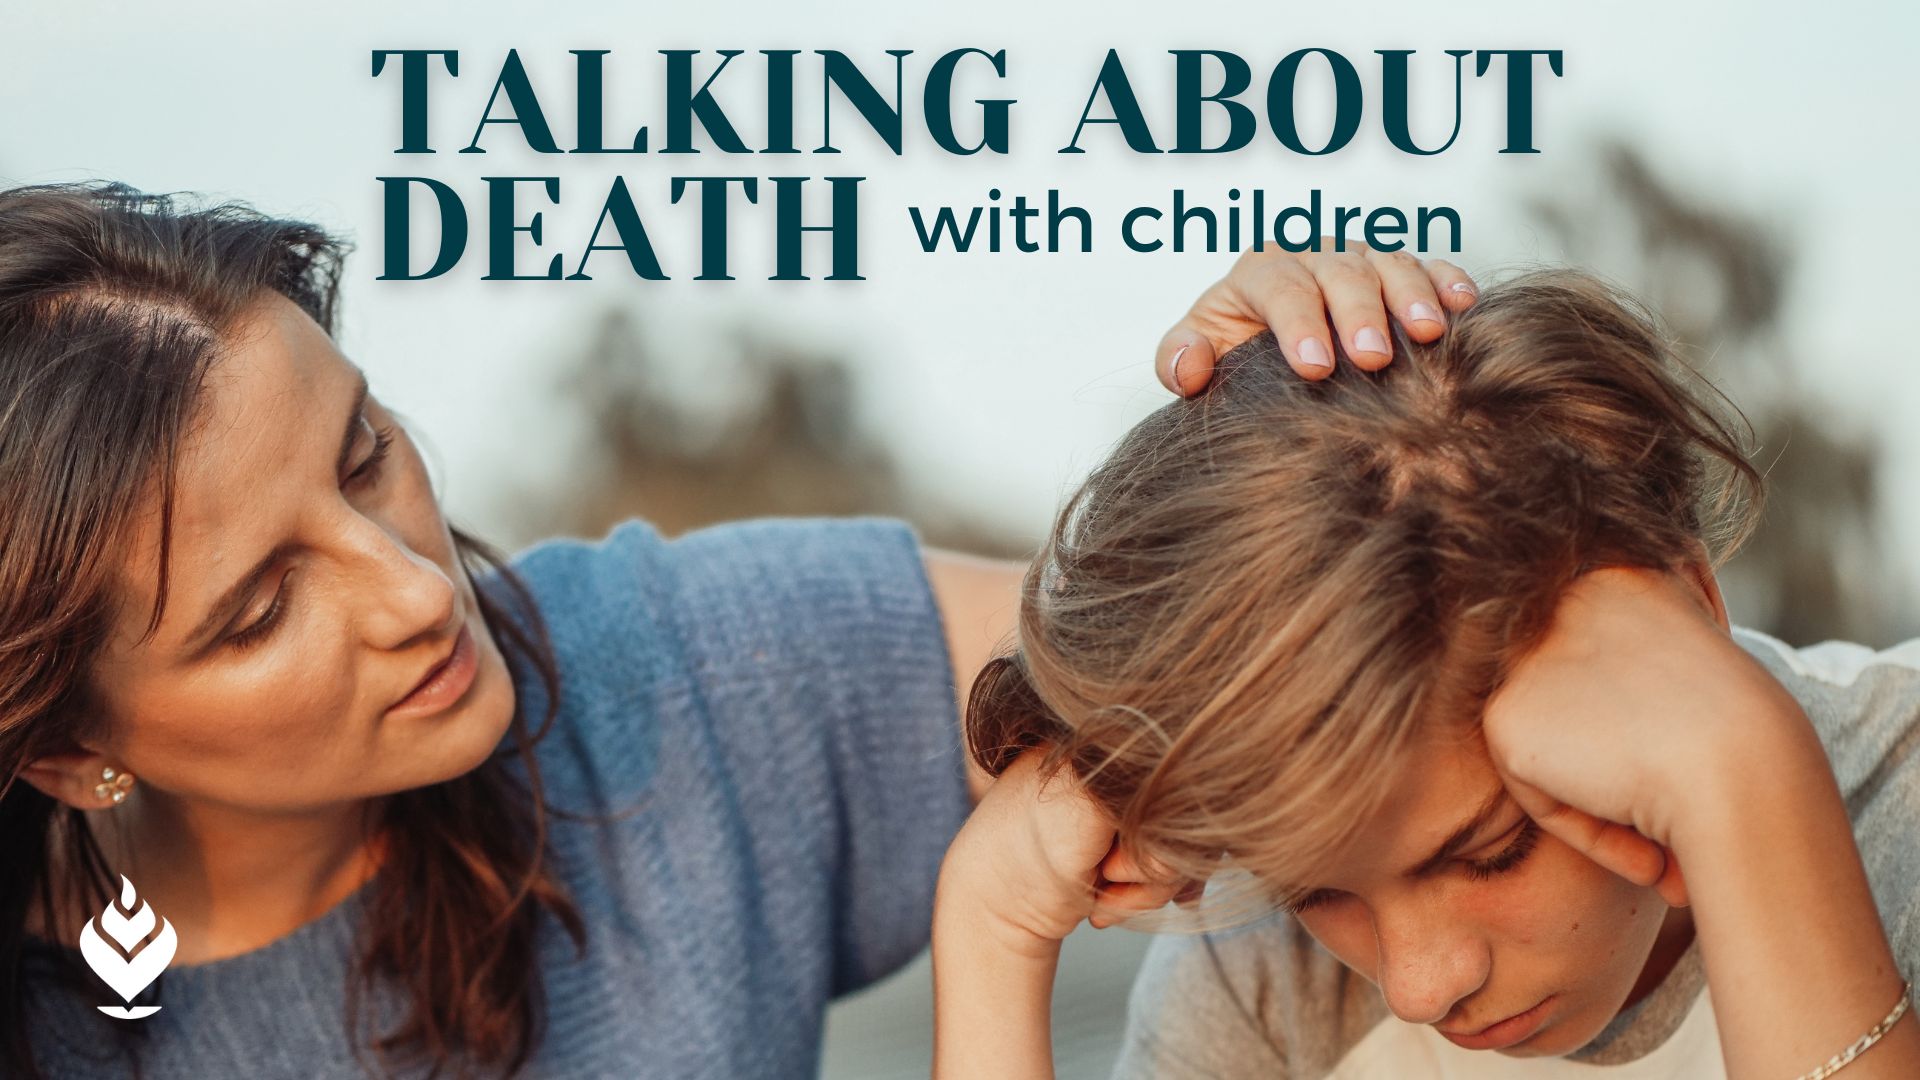 Talking about death, grief and loss